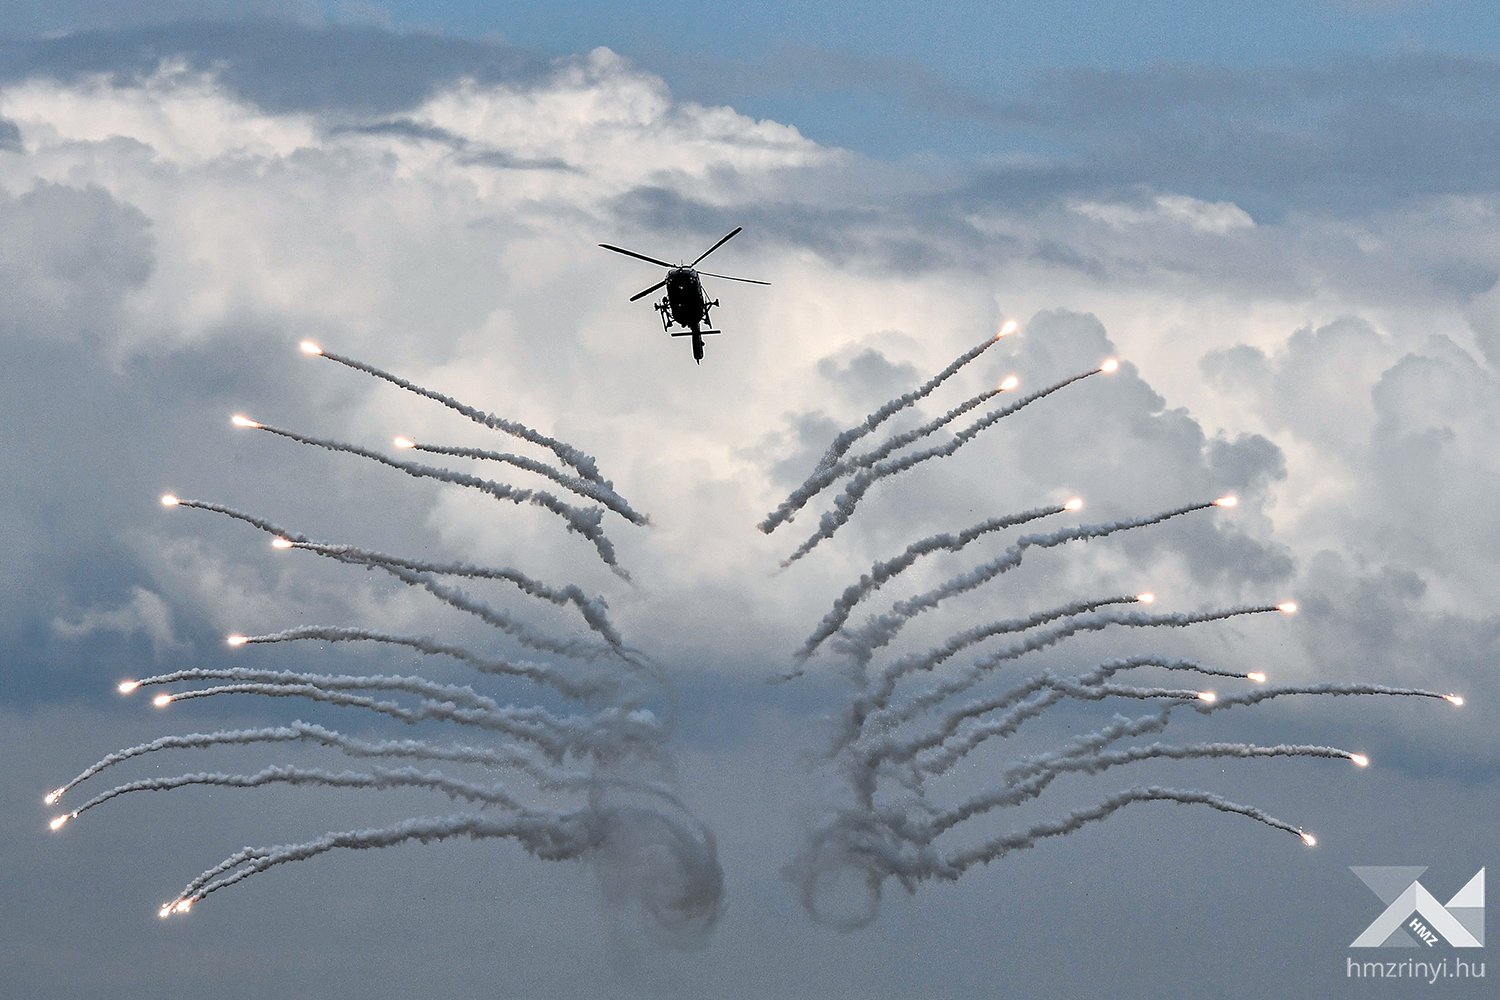 Spectacular Operation with Helicopters